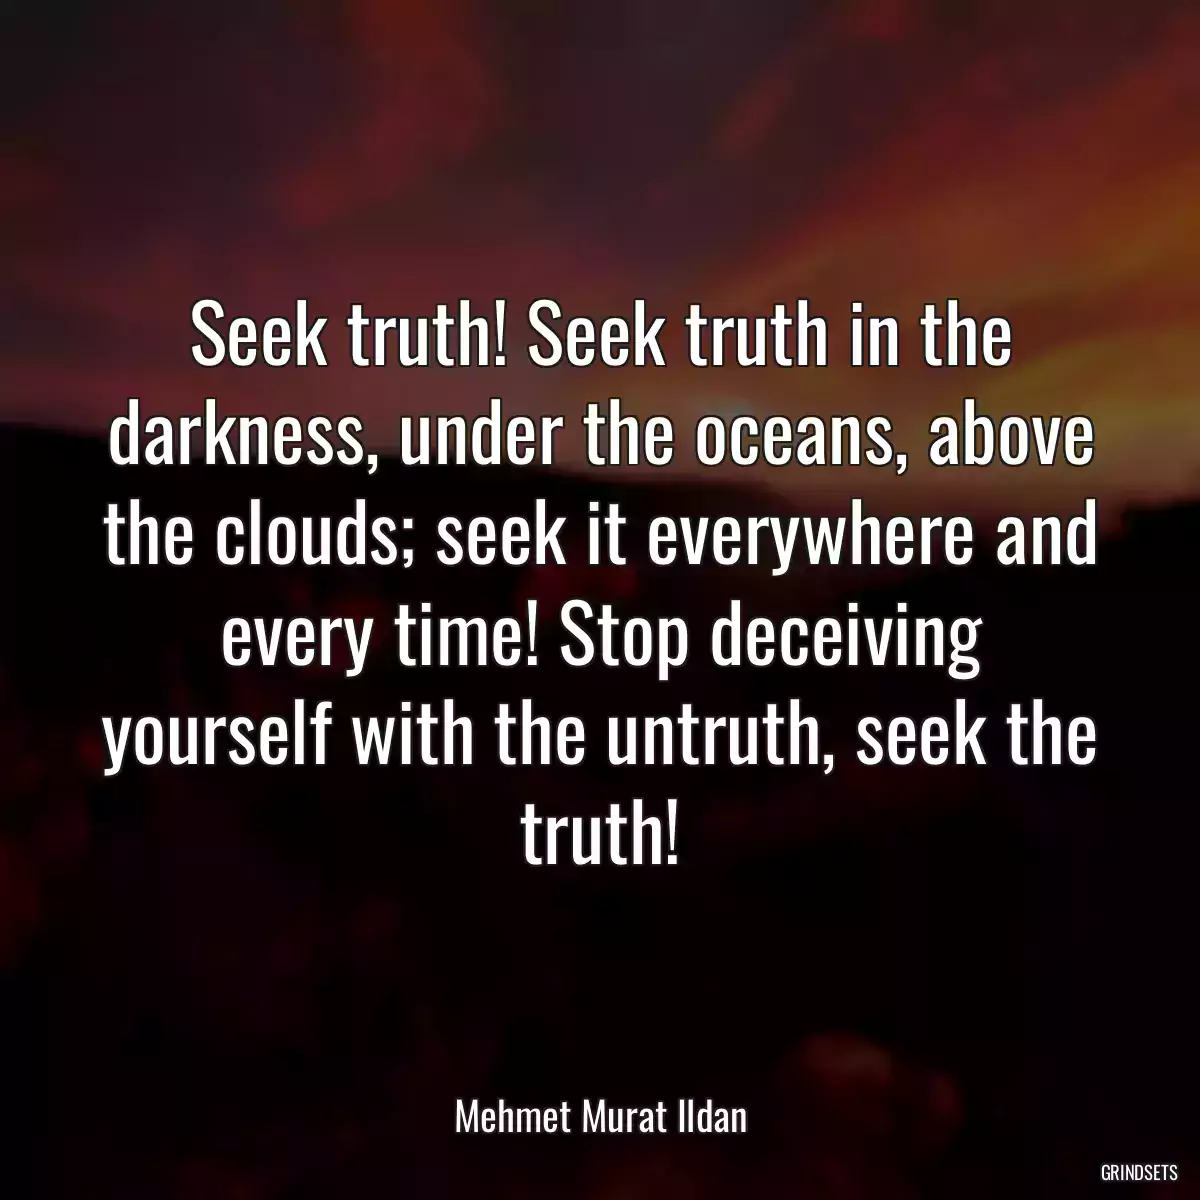 Seek truth! Seek truth in the darkness, under the oceans, above the clouds; seek it everywhere and every time! Stop deceiving yourself with the untruth, seek the truth!